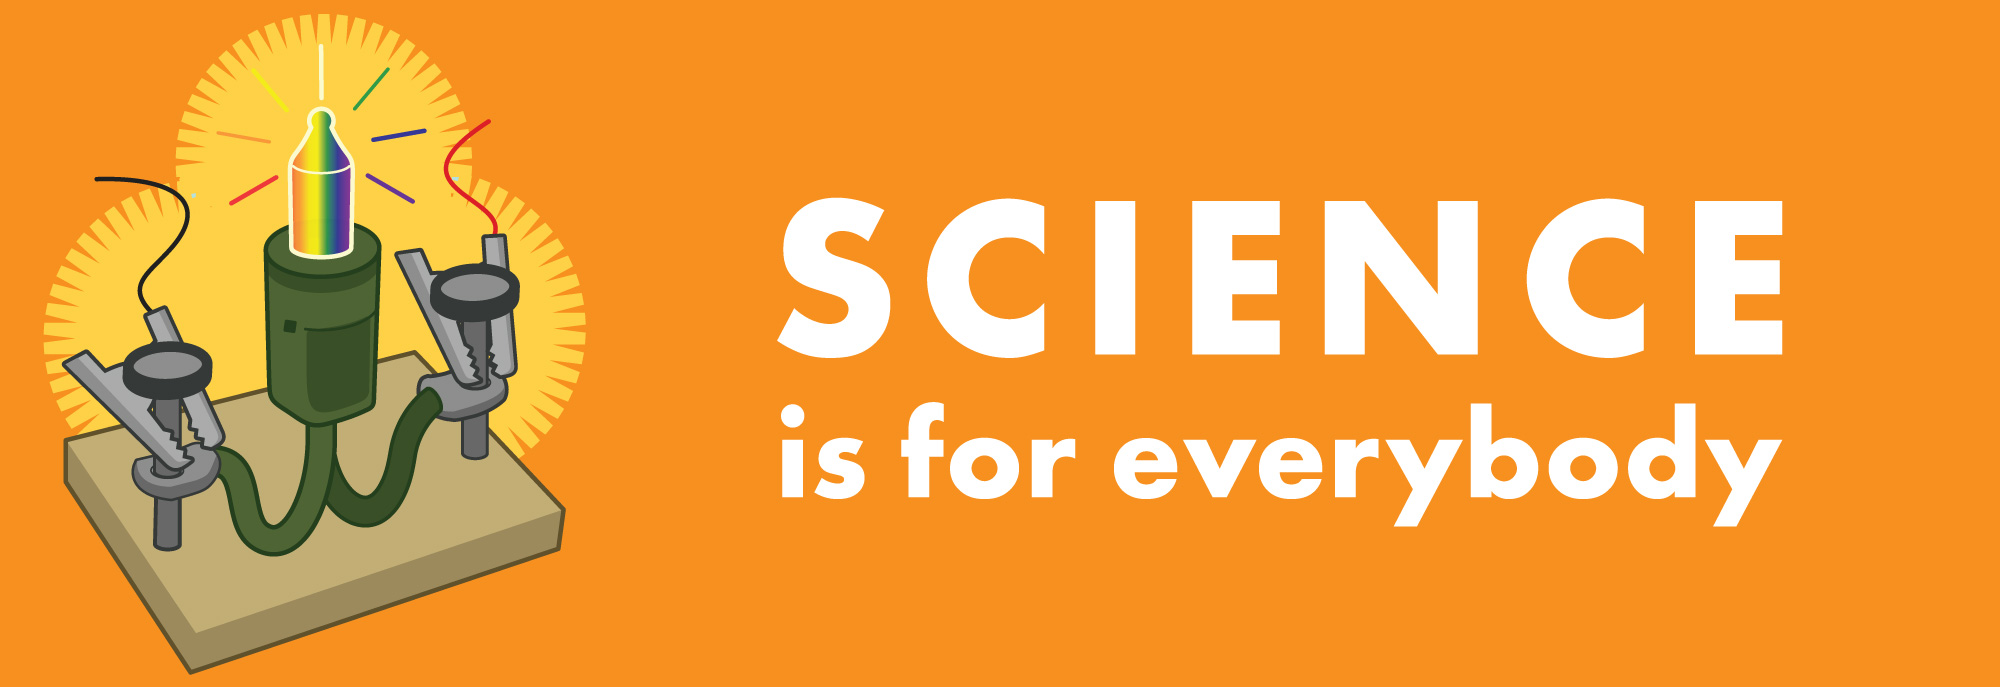 Science is for everybody.